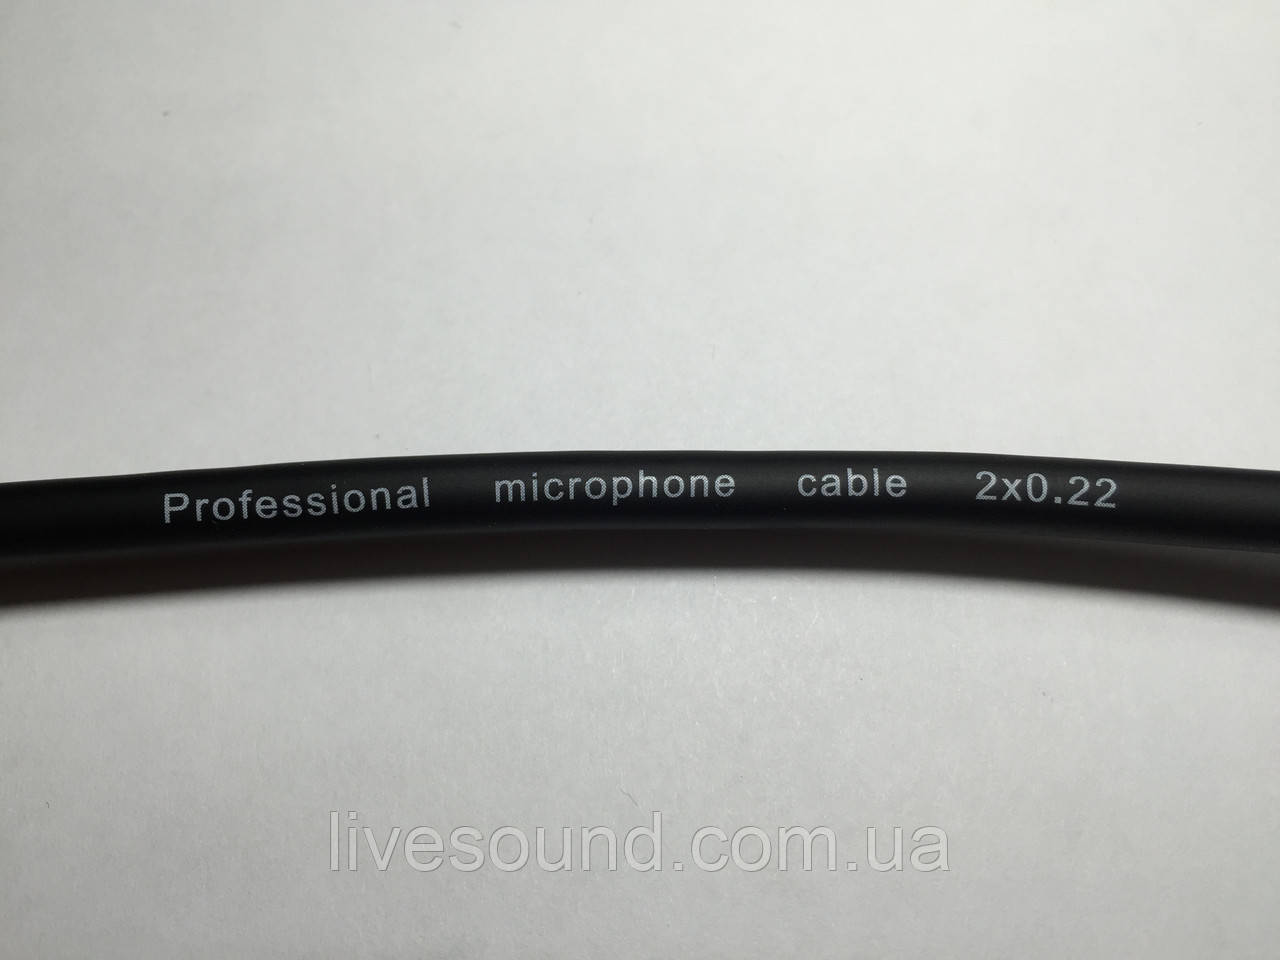 Professional Microphone Cable 2x0.22